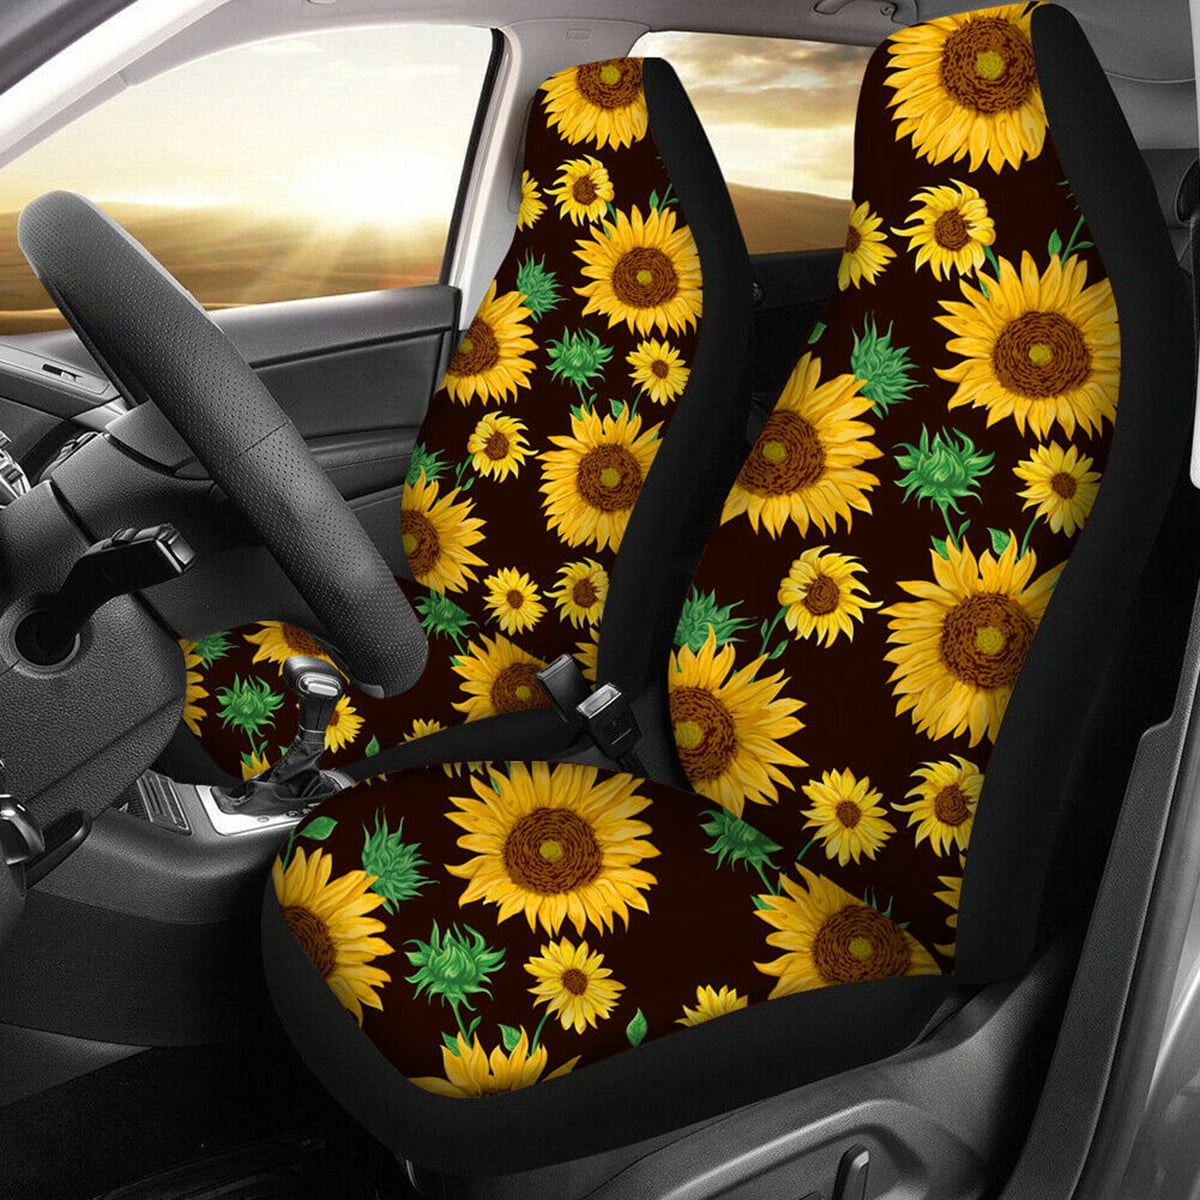 Britimes Sunflower Set of 2 Car Seat Covers for Women and Men Sunflower Print Auto Accessories Carseat Front Seats Fit for Cars,SUV Sedan,Truck 